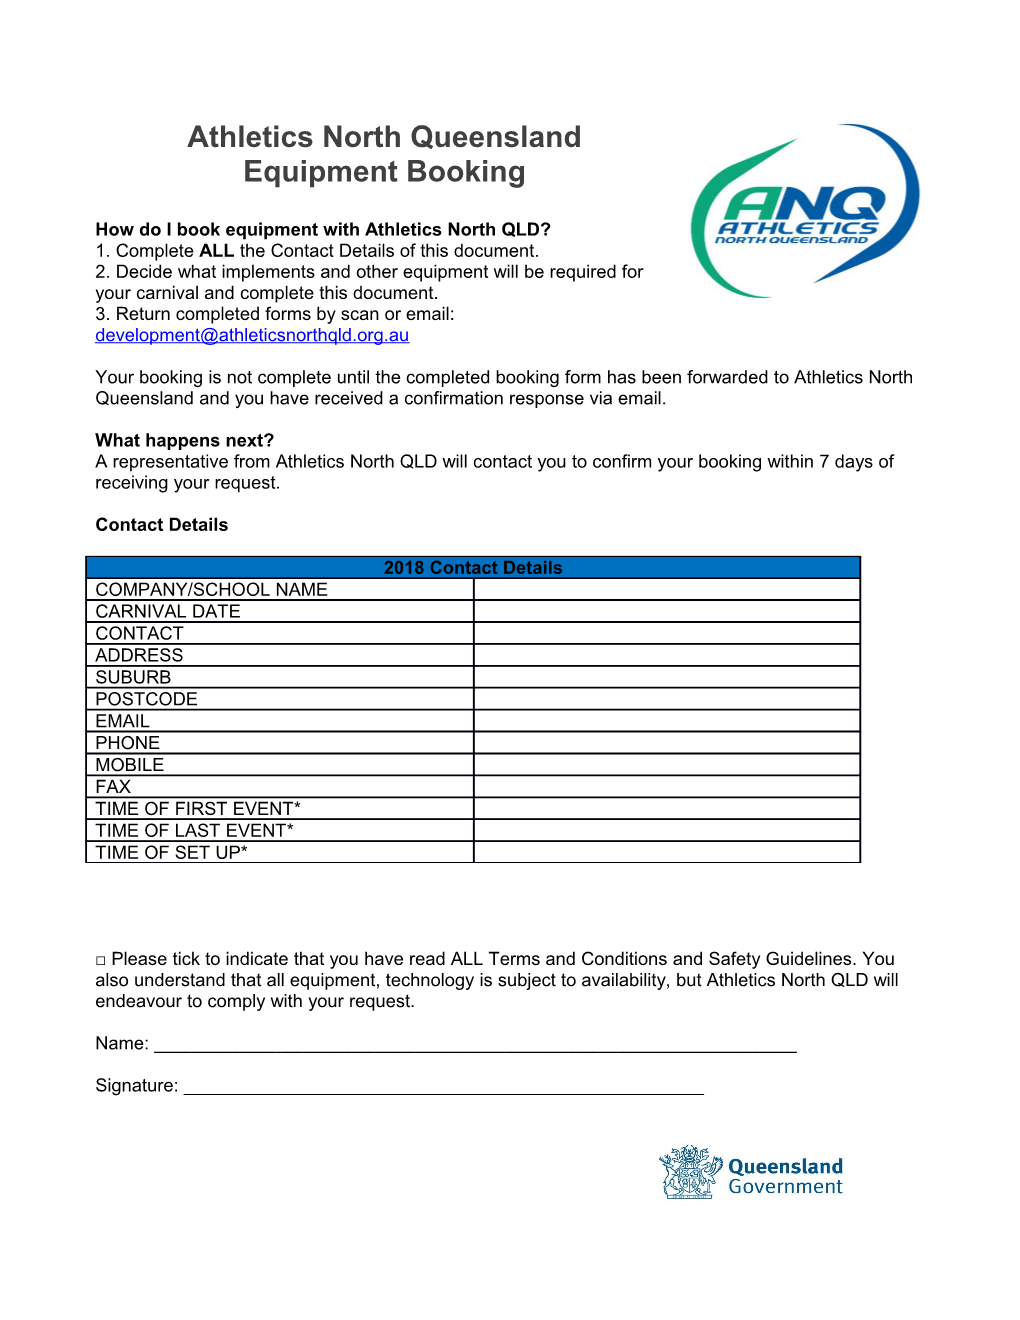 How Do I Book Equipment with Athletics North QLD?